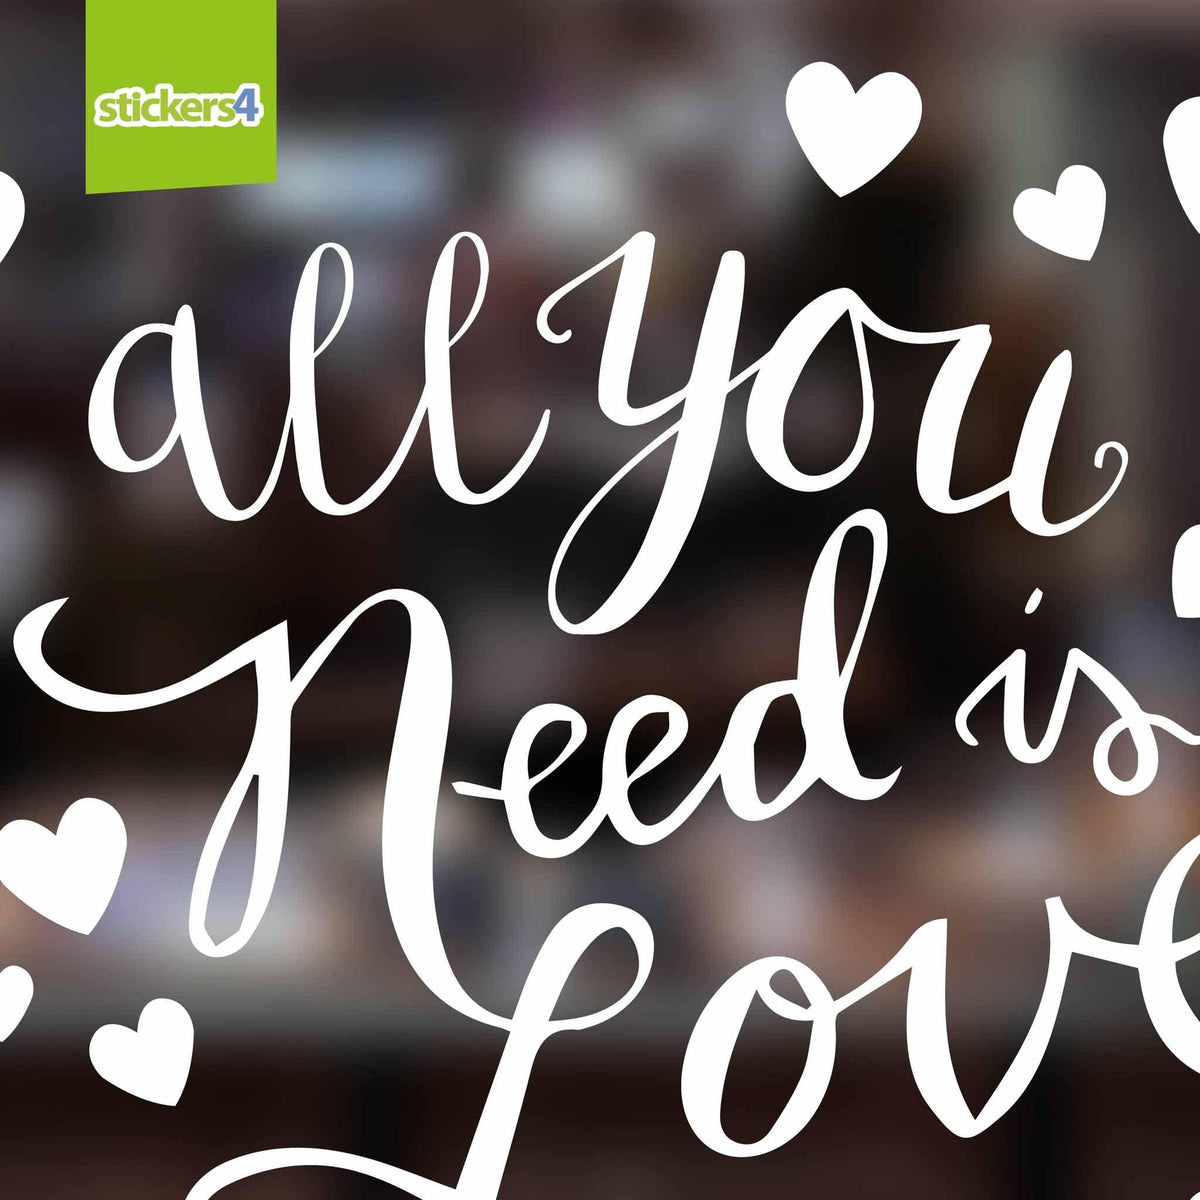 All You Need Is Love Window Cling